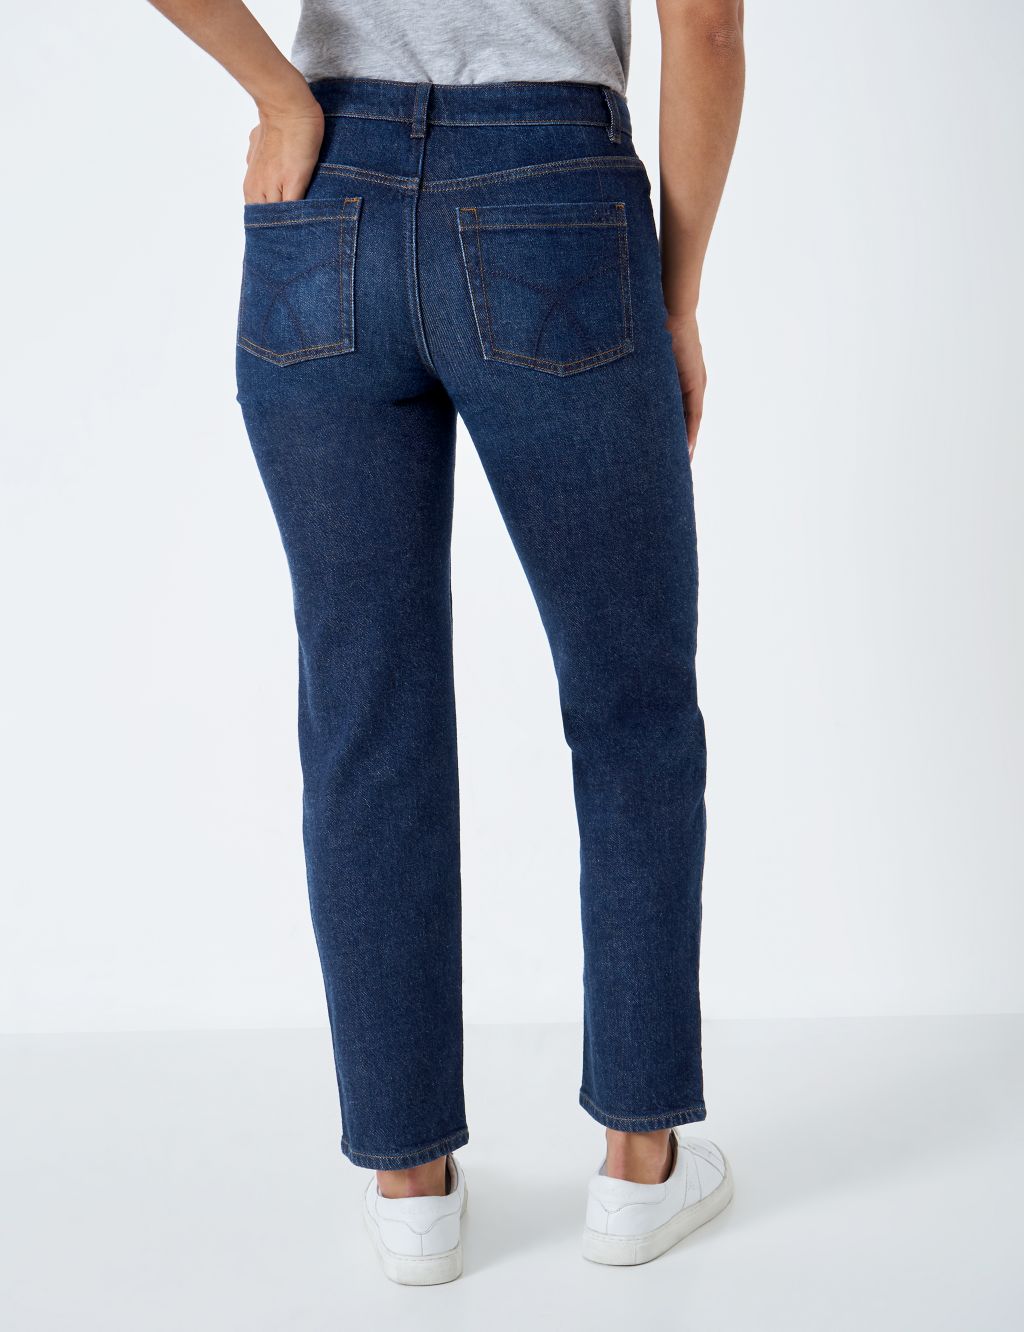 Girlfriend High Waisted Jeans image 4